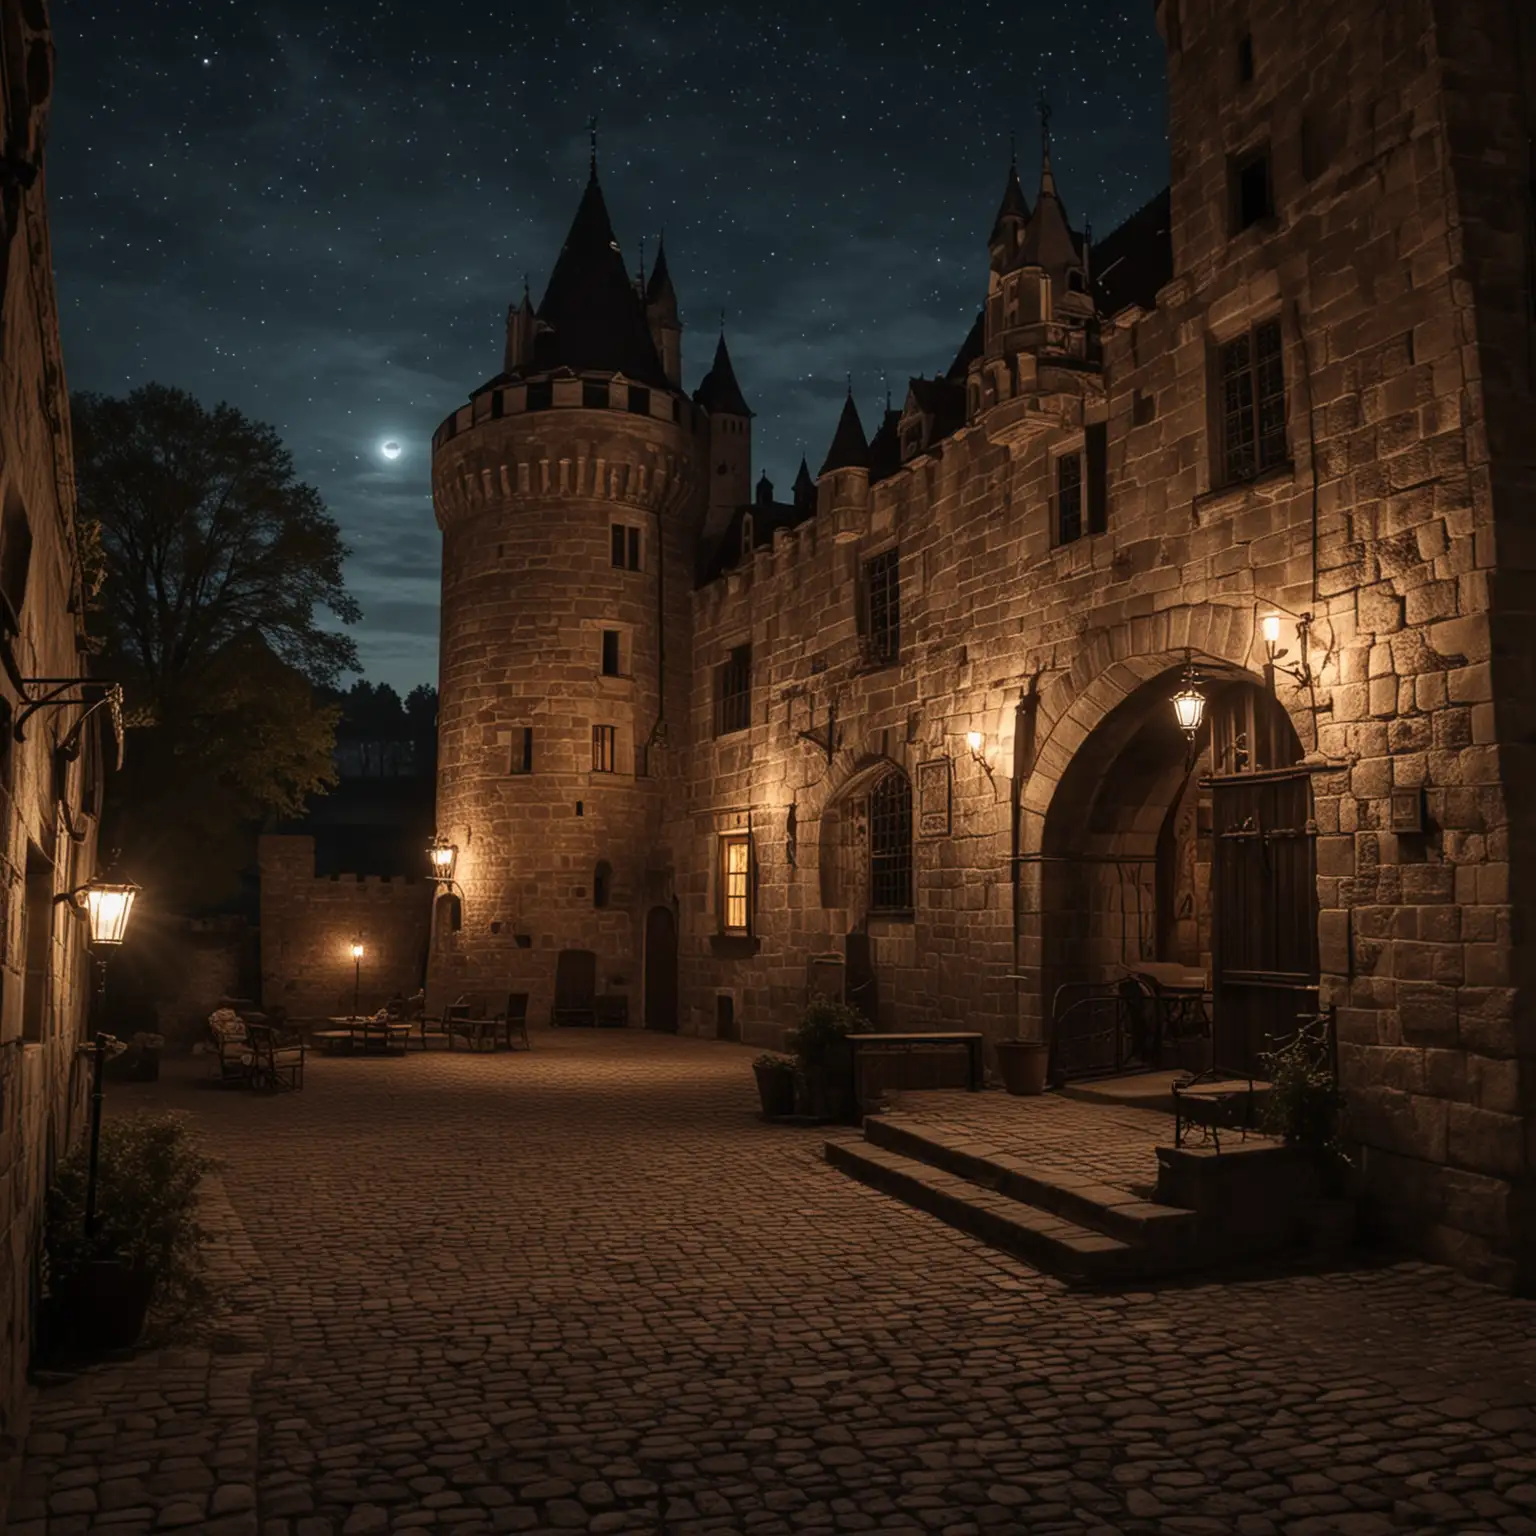 Romantic Medieval Castle at Midnight with OldFashioned Ambiance